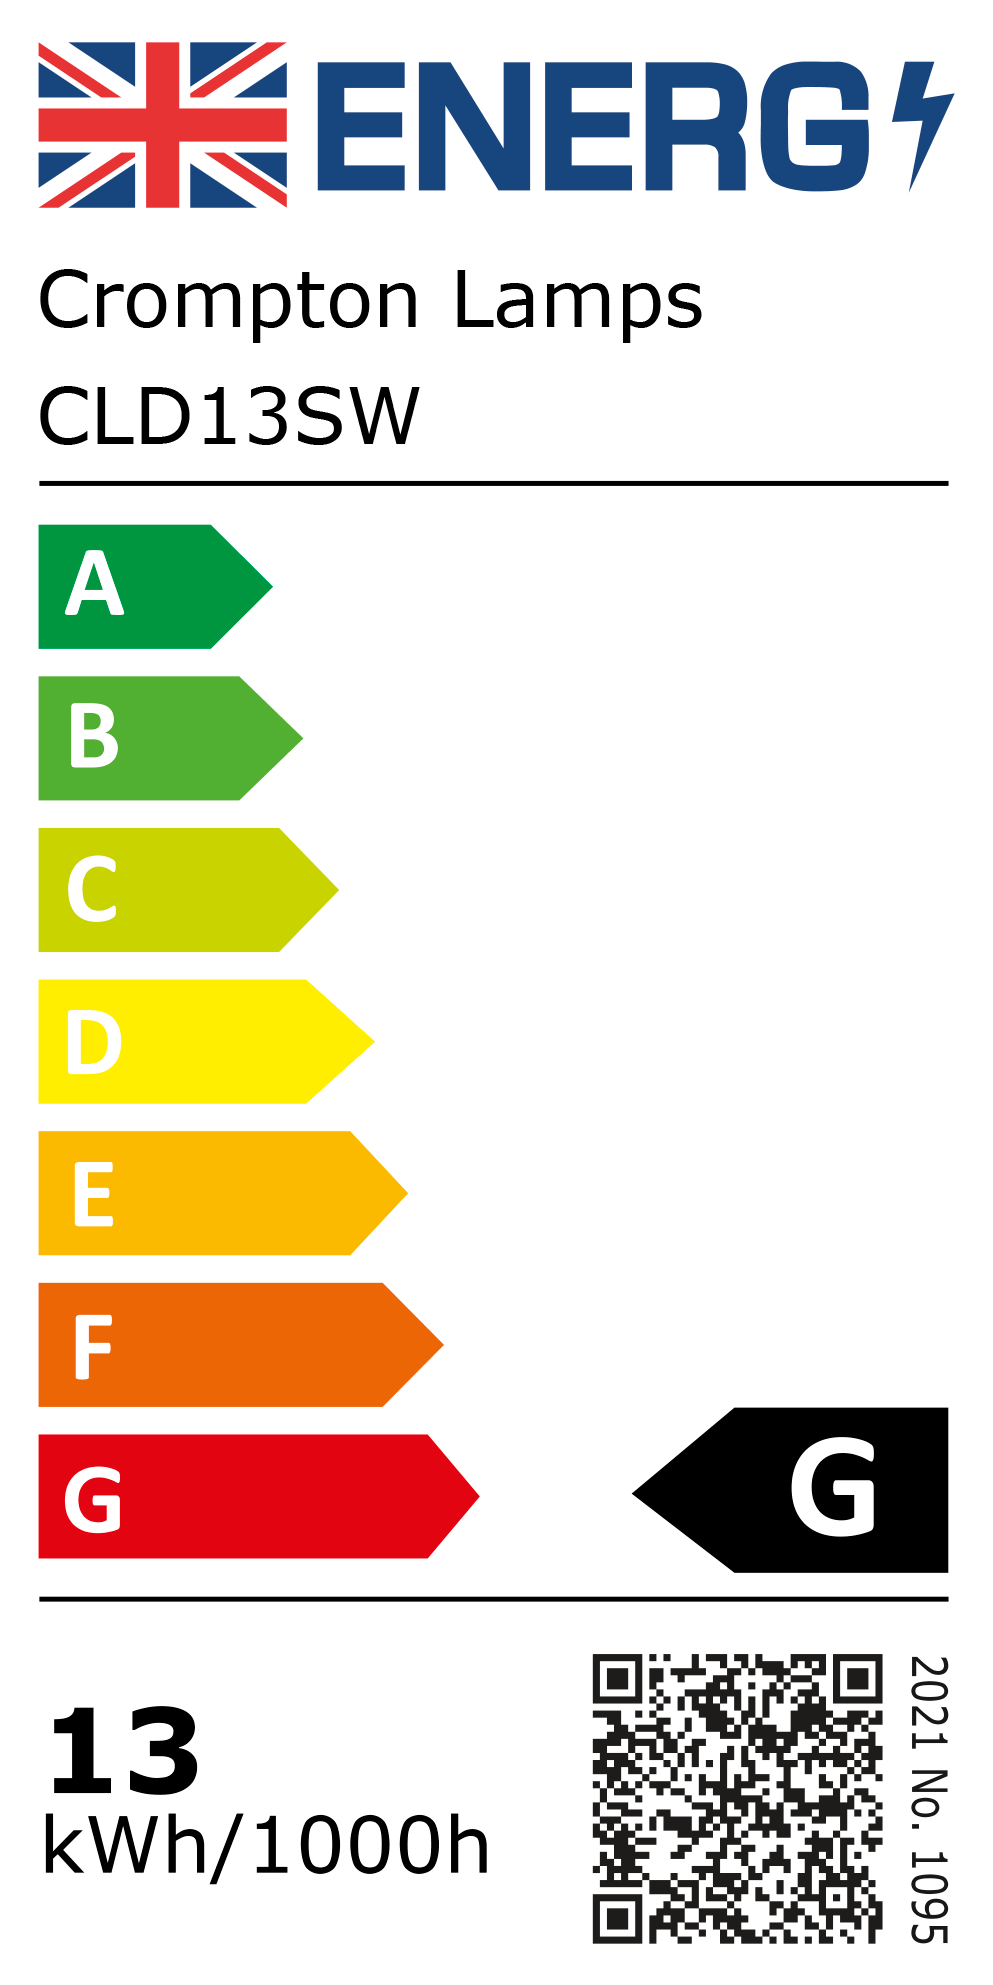 New 2021 Energy Rating Label: MPN CLD13SW